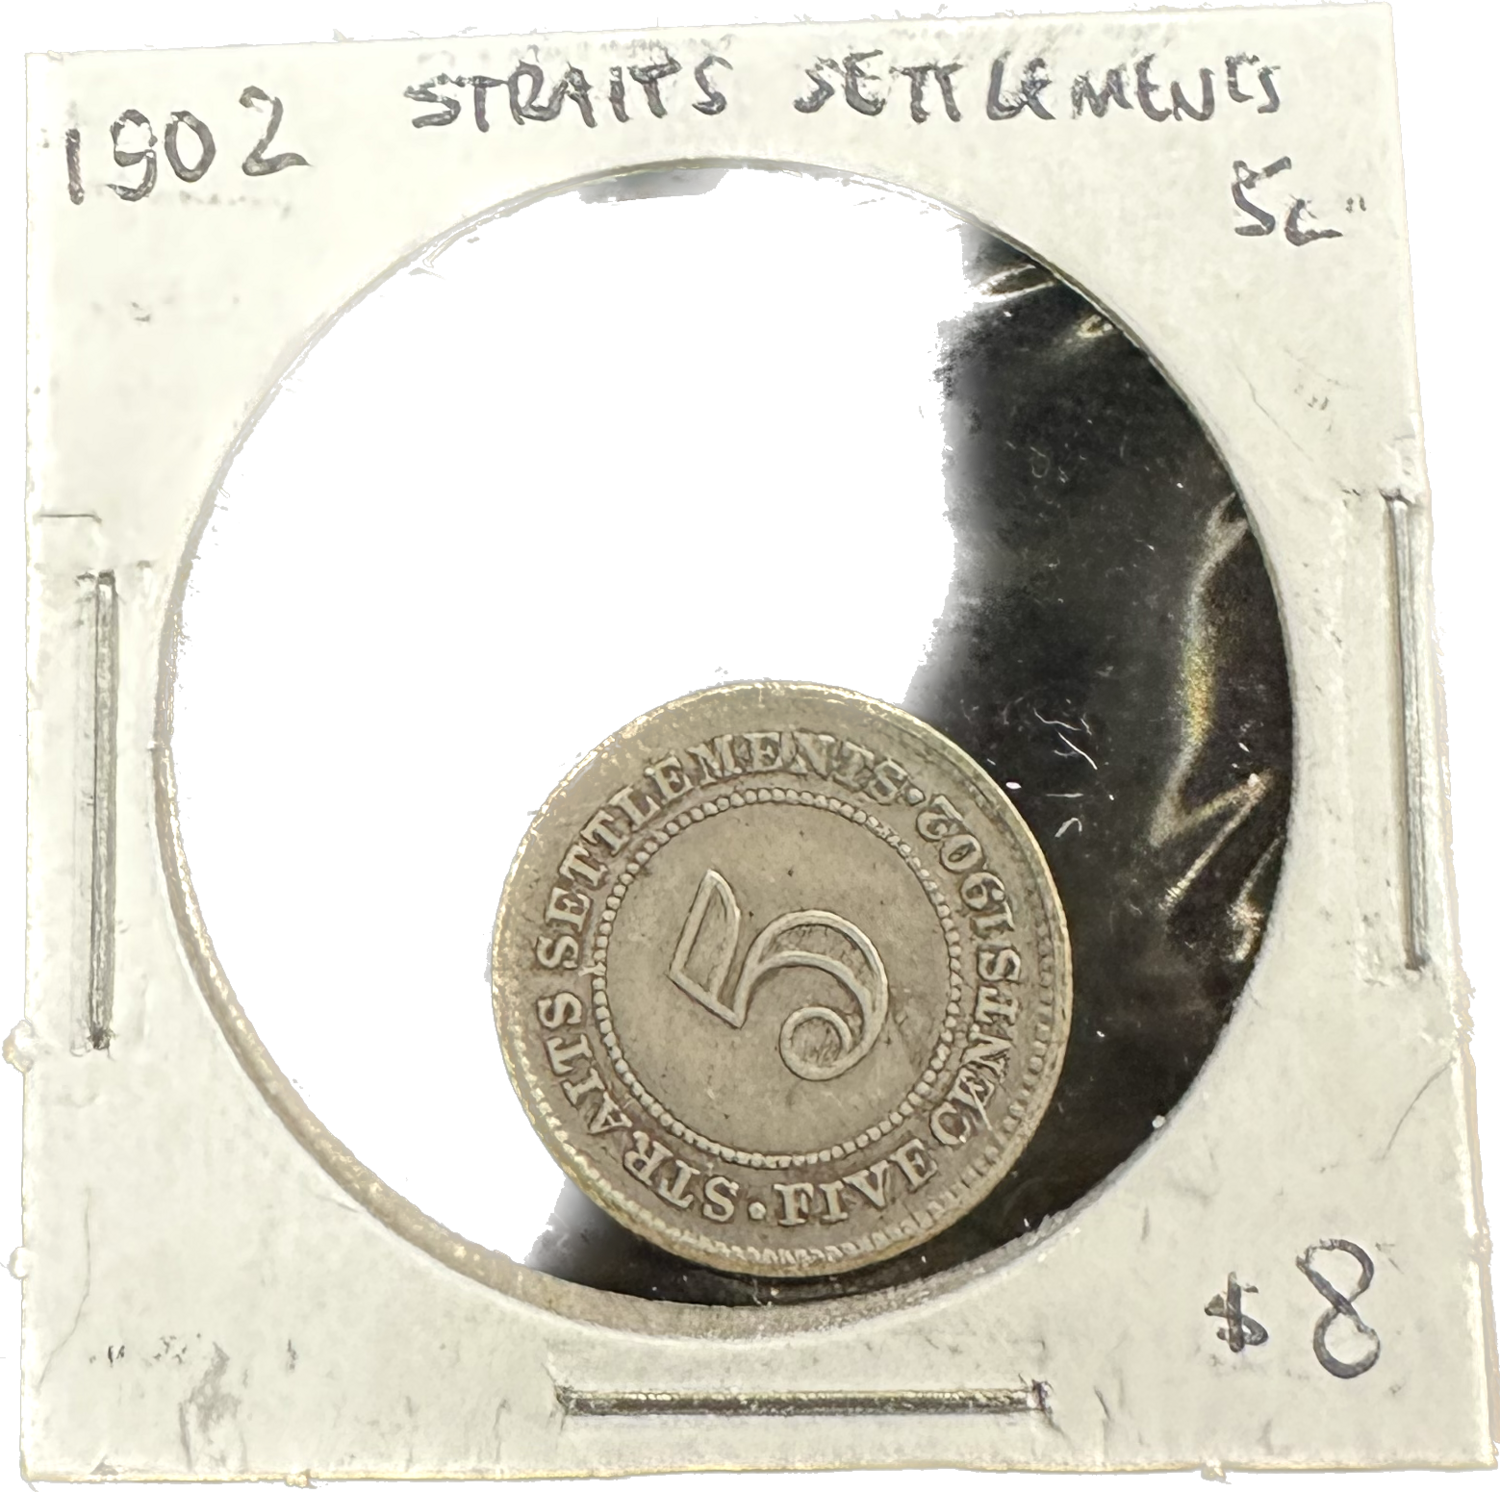 Straits Settlements 5 Cents 1902 Coin